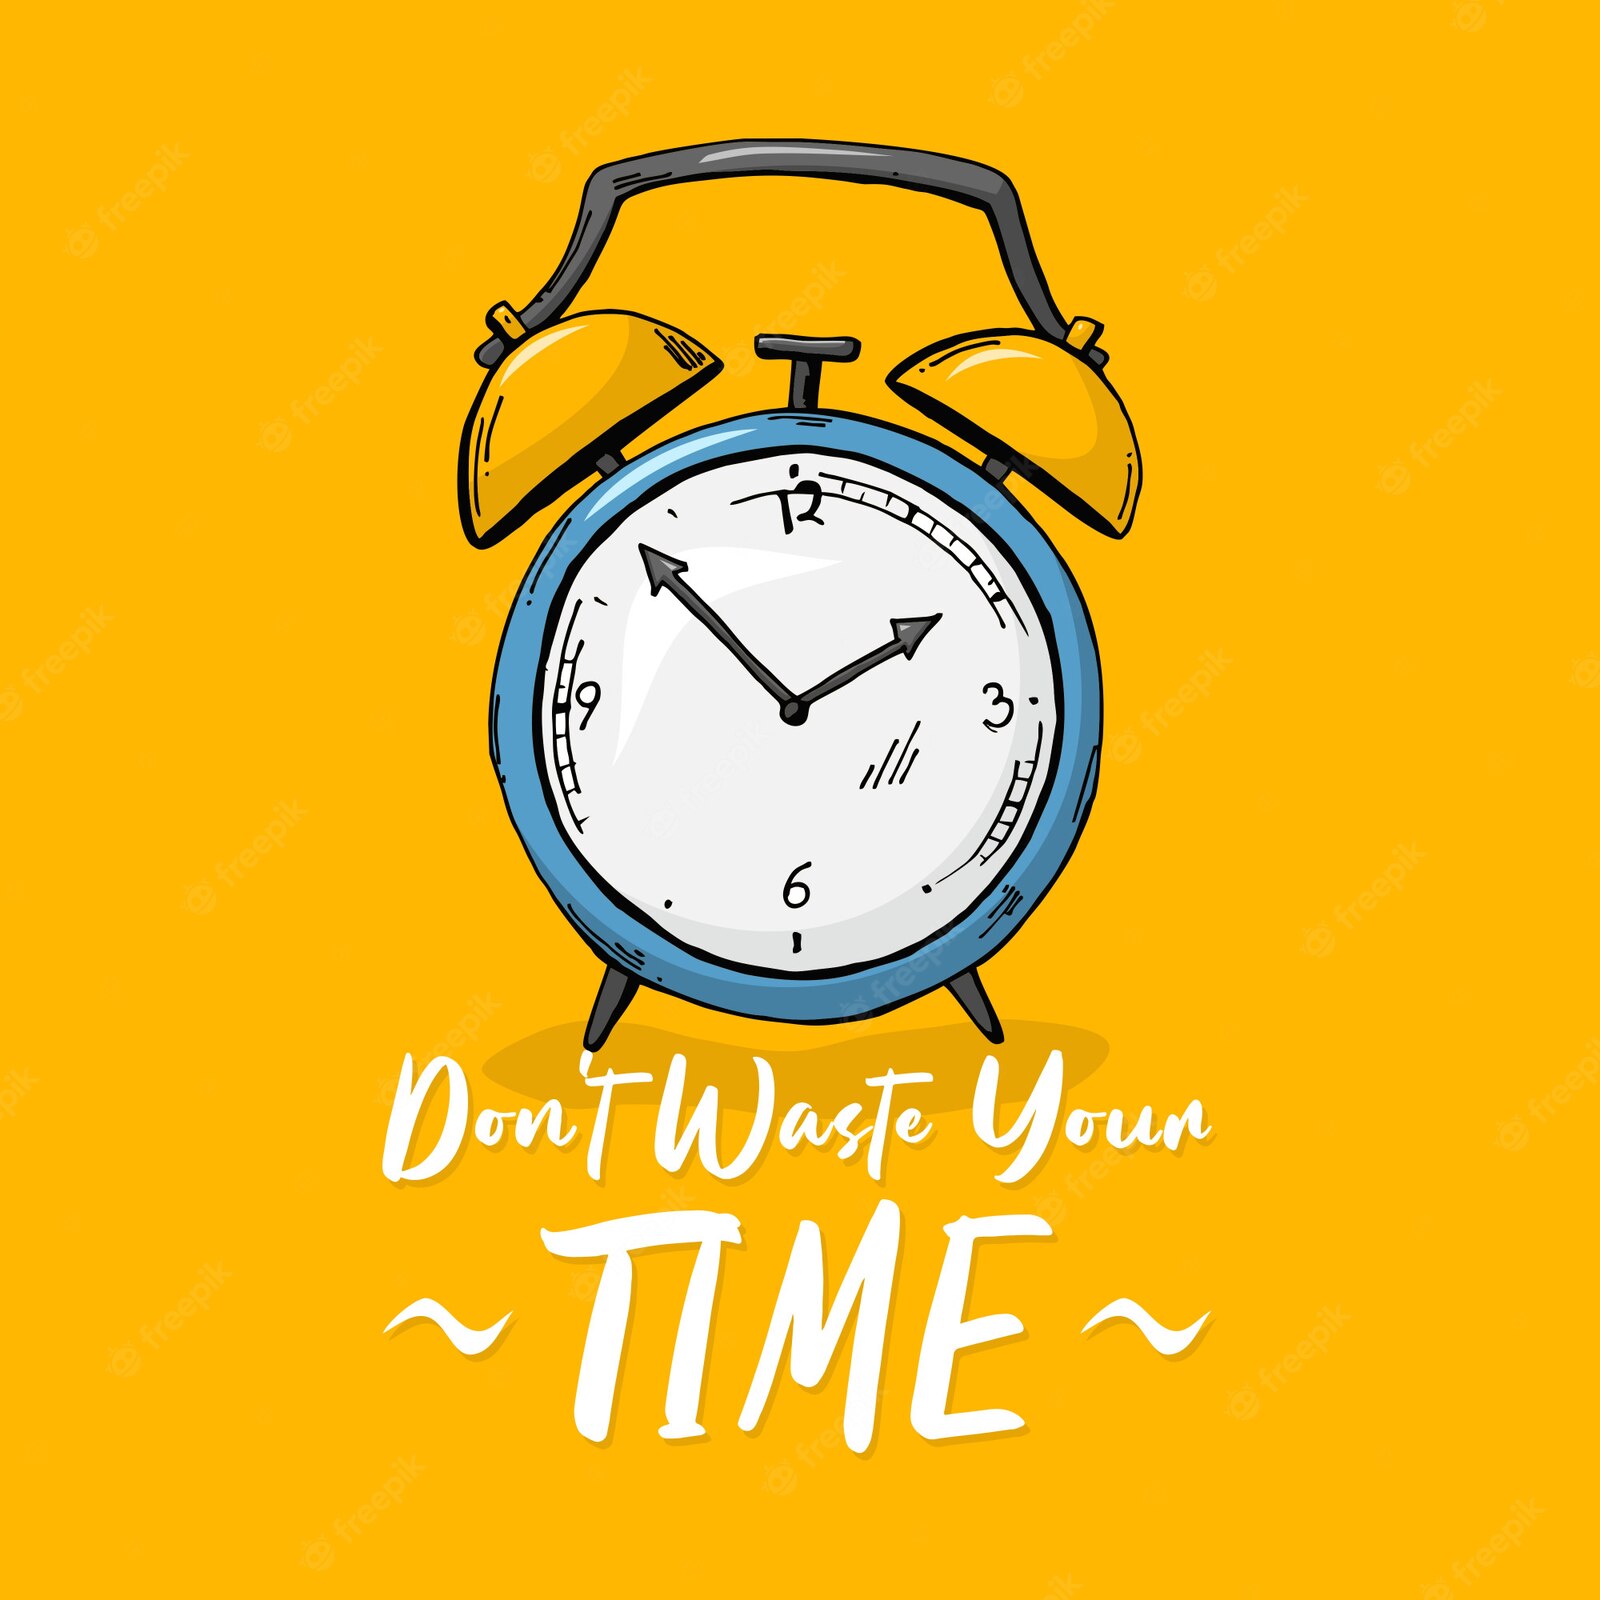 Download Dont waste your time quote quotes for your mobile cell phone